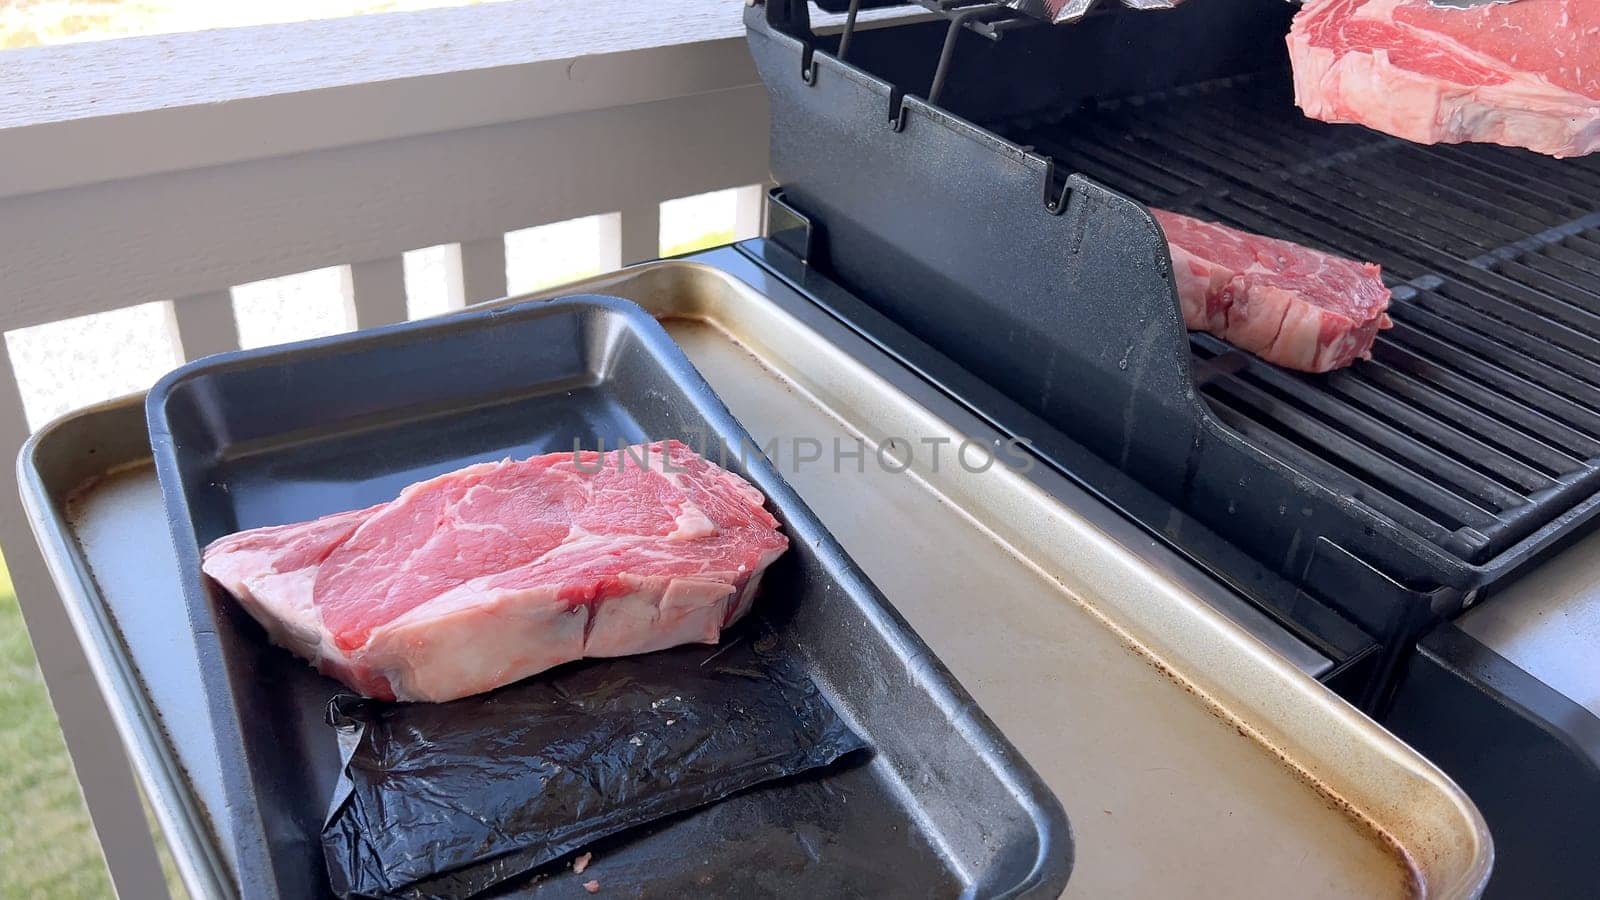 Grilling Thick Steaks on an Outdoor Barbecue Grill by arinahabich